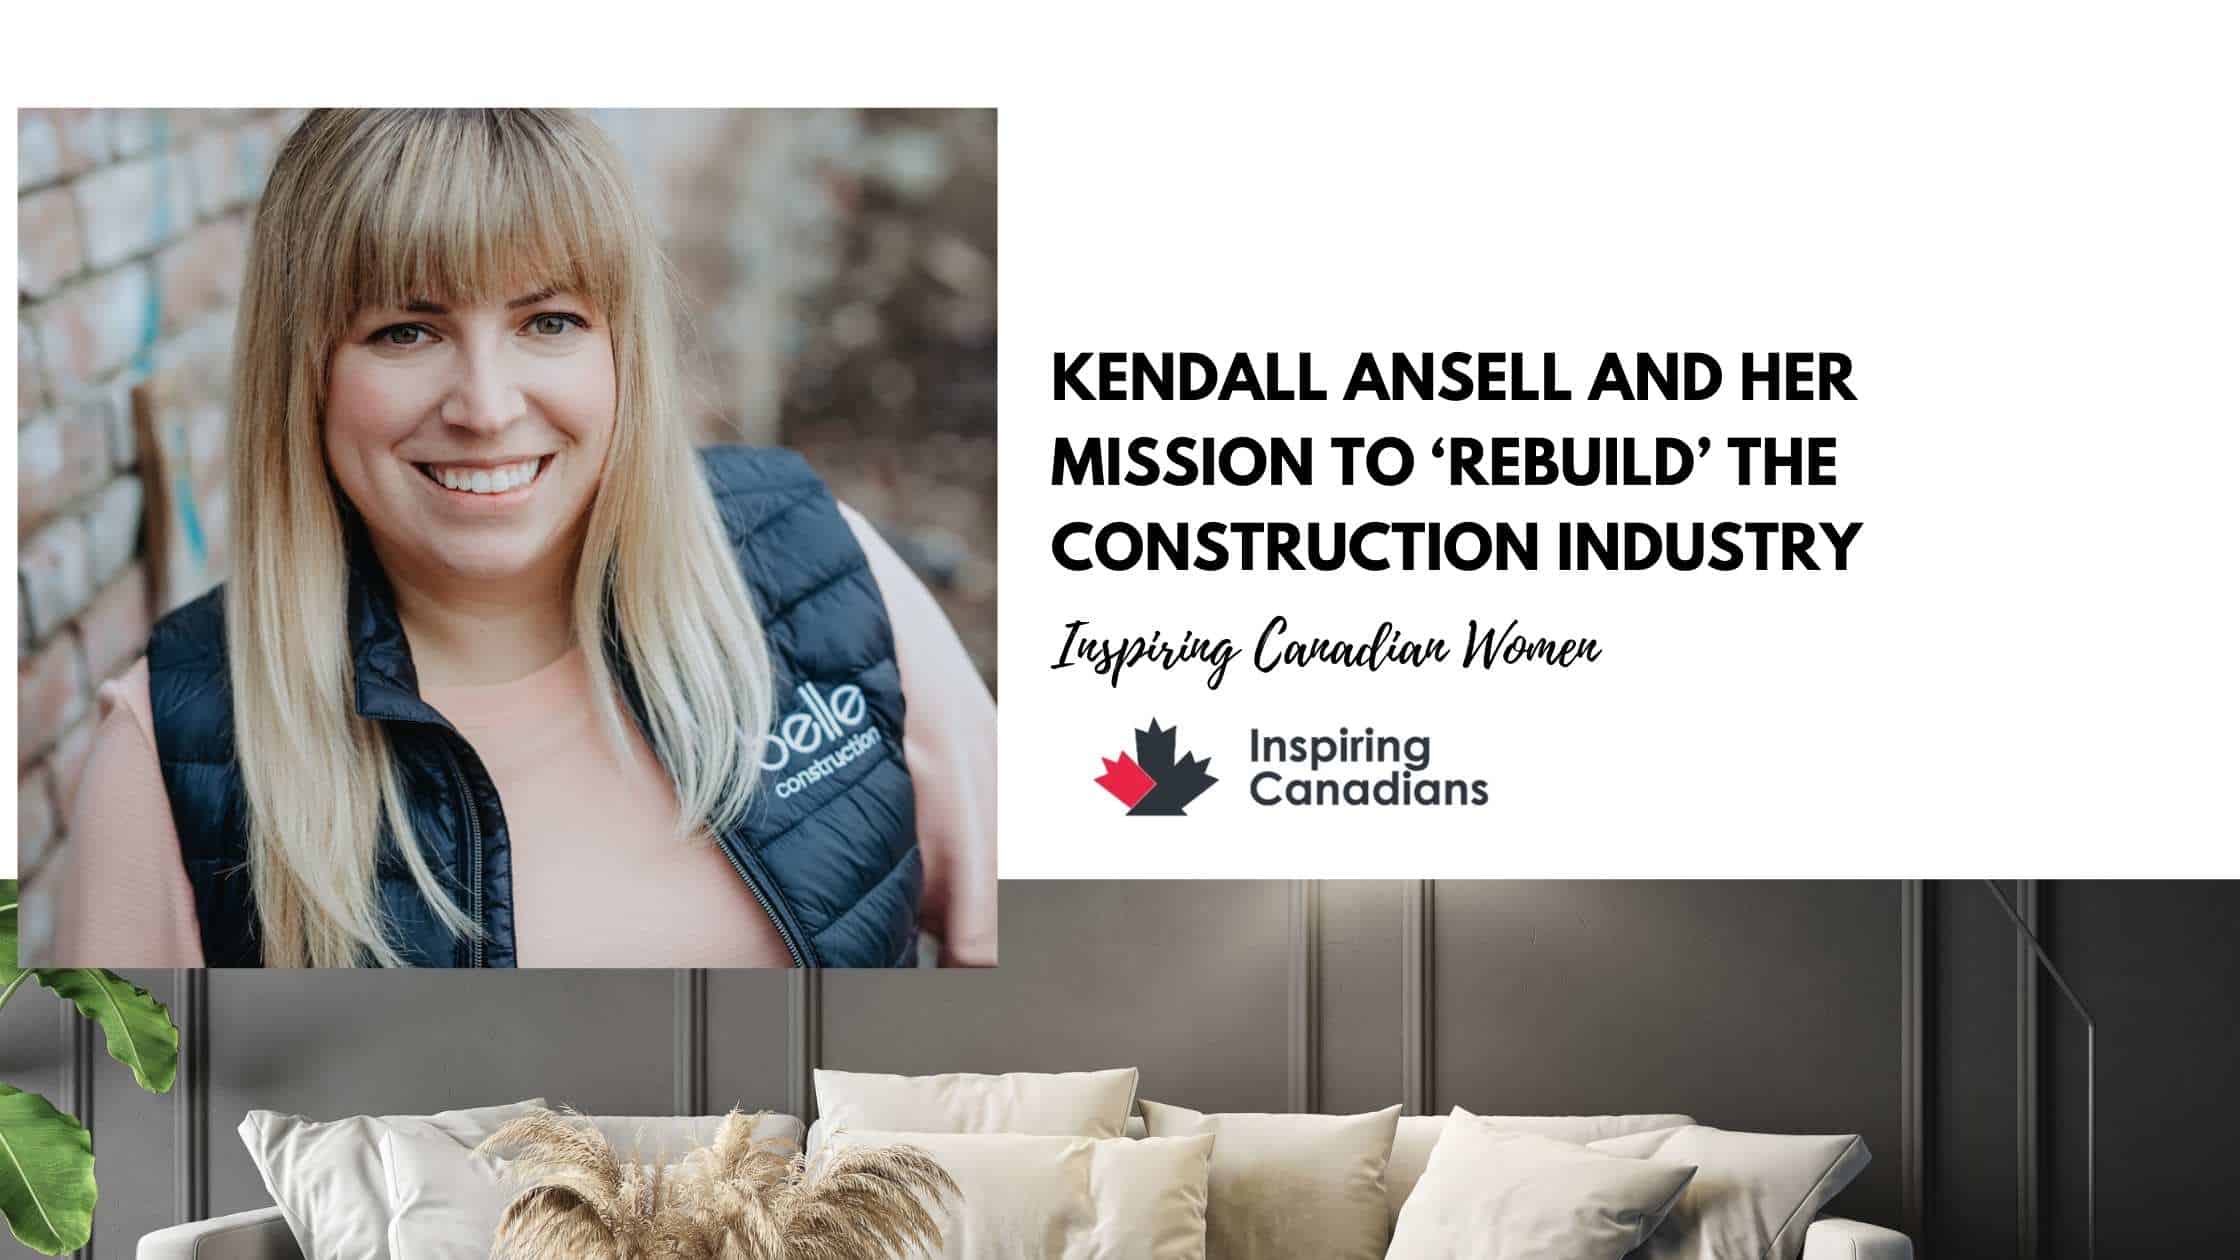 Kendall Ansell is an award-winning interior designer and owner of both Kendall Ansell Interiors and Belle Construction.